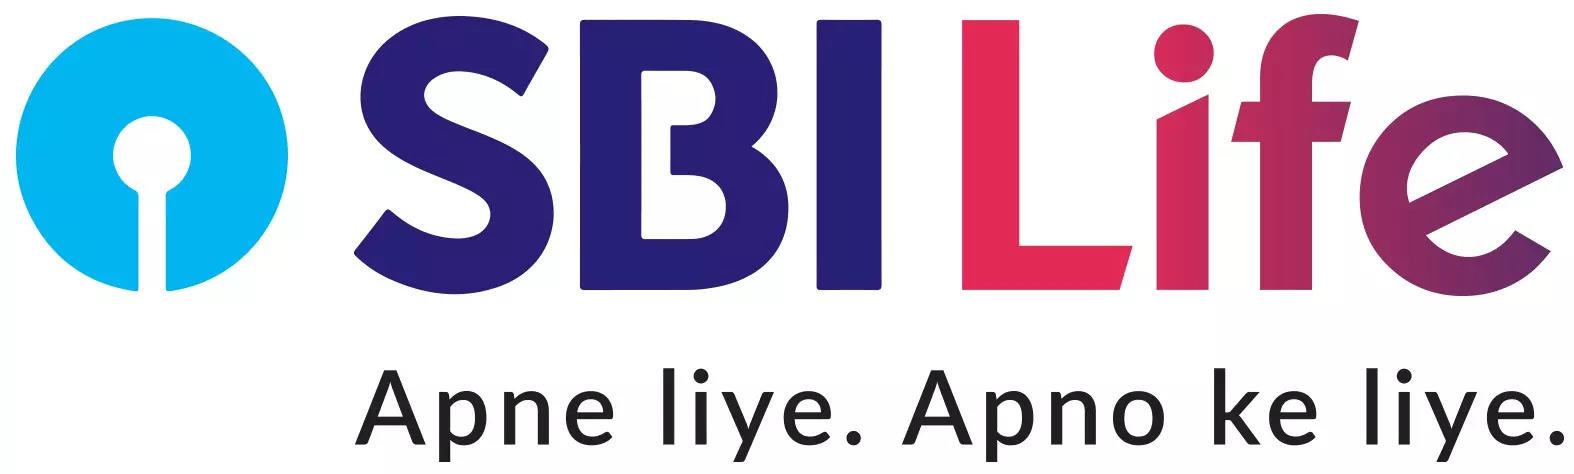 SBI Life Insurance Company Share Price Live Updates: SBI Life Insurance Closes at Rs 1431.95 with 6-Month Beta of 0.67 